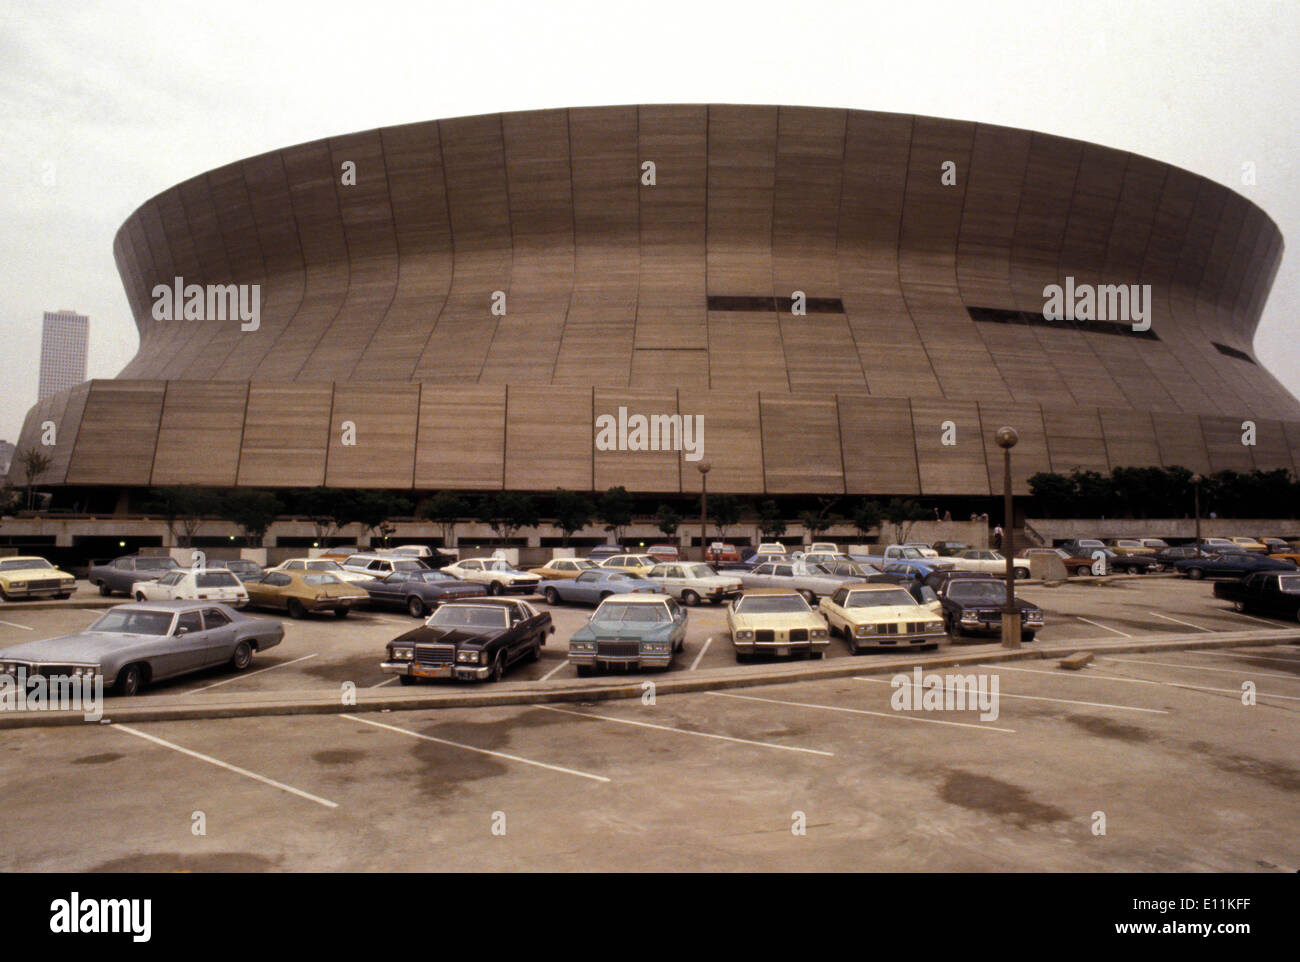 Sep 15, 1978; New Orleans, LA, USA; The Superdome in New Orleans where heavyweight boxer MUHAMMAD ALI will fight to take back his world champion title that he lost in split decision to LEON SPINKS seven months agoin February 1978. During this fight ALI wins the title for a record third time.. (Credit Image: KEYSTONE Pictures USA/ZUMAPRESS.com) Stock Photo